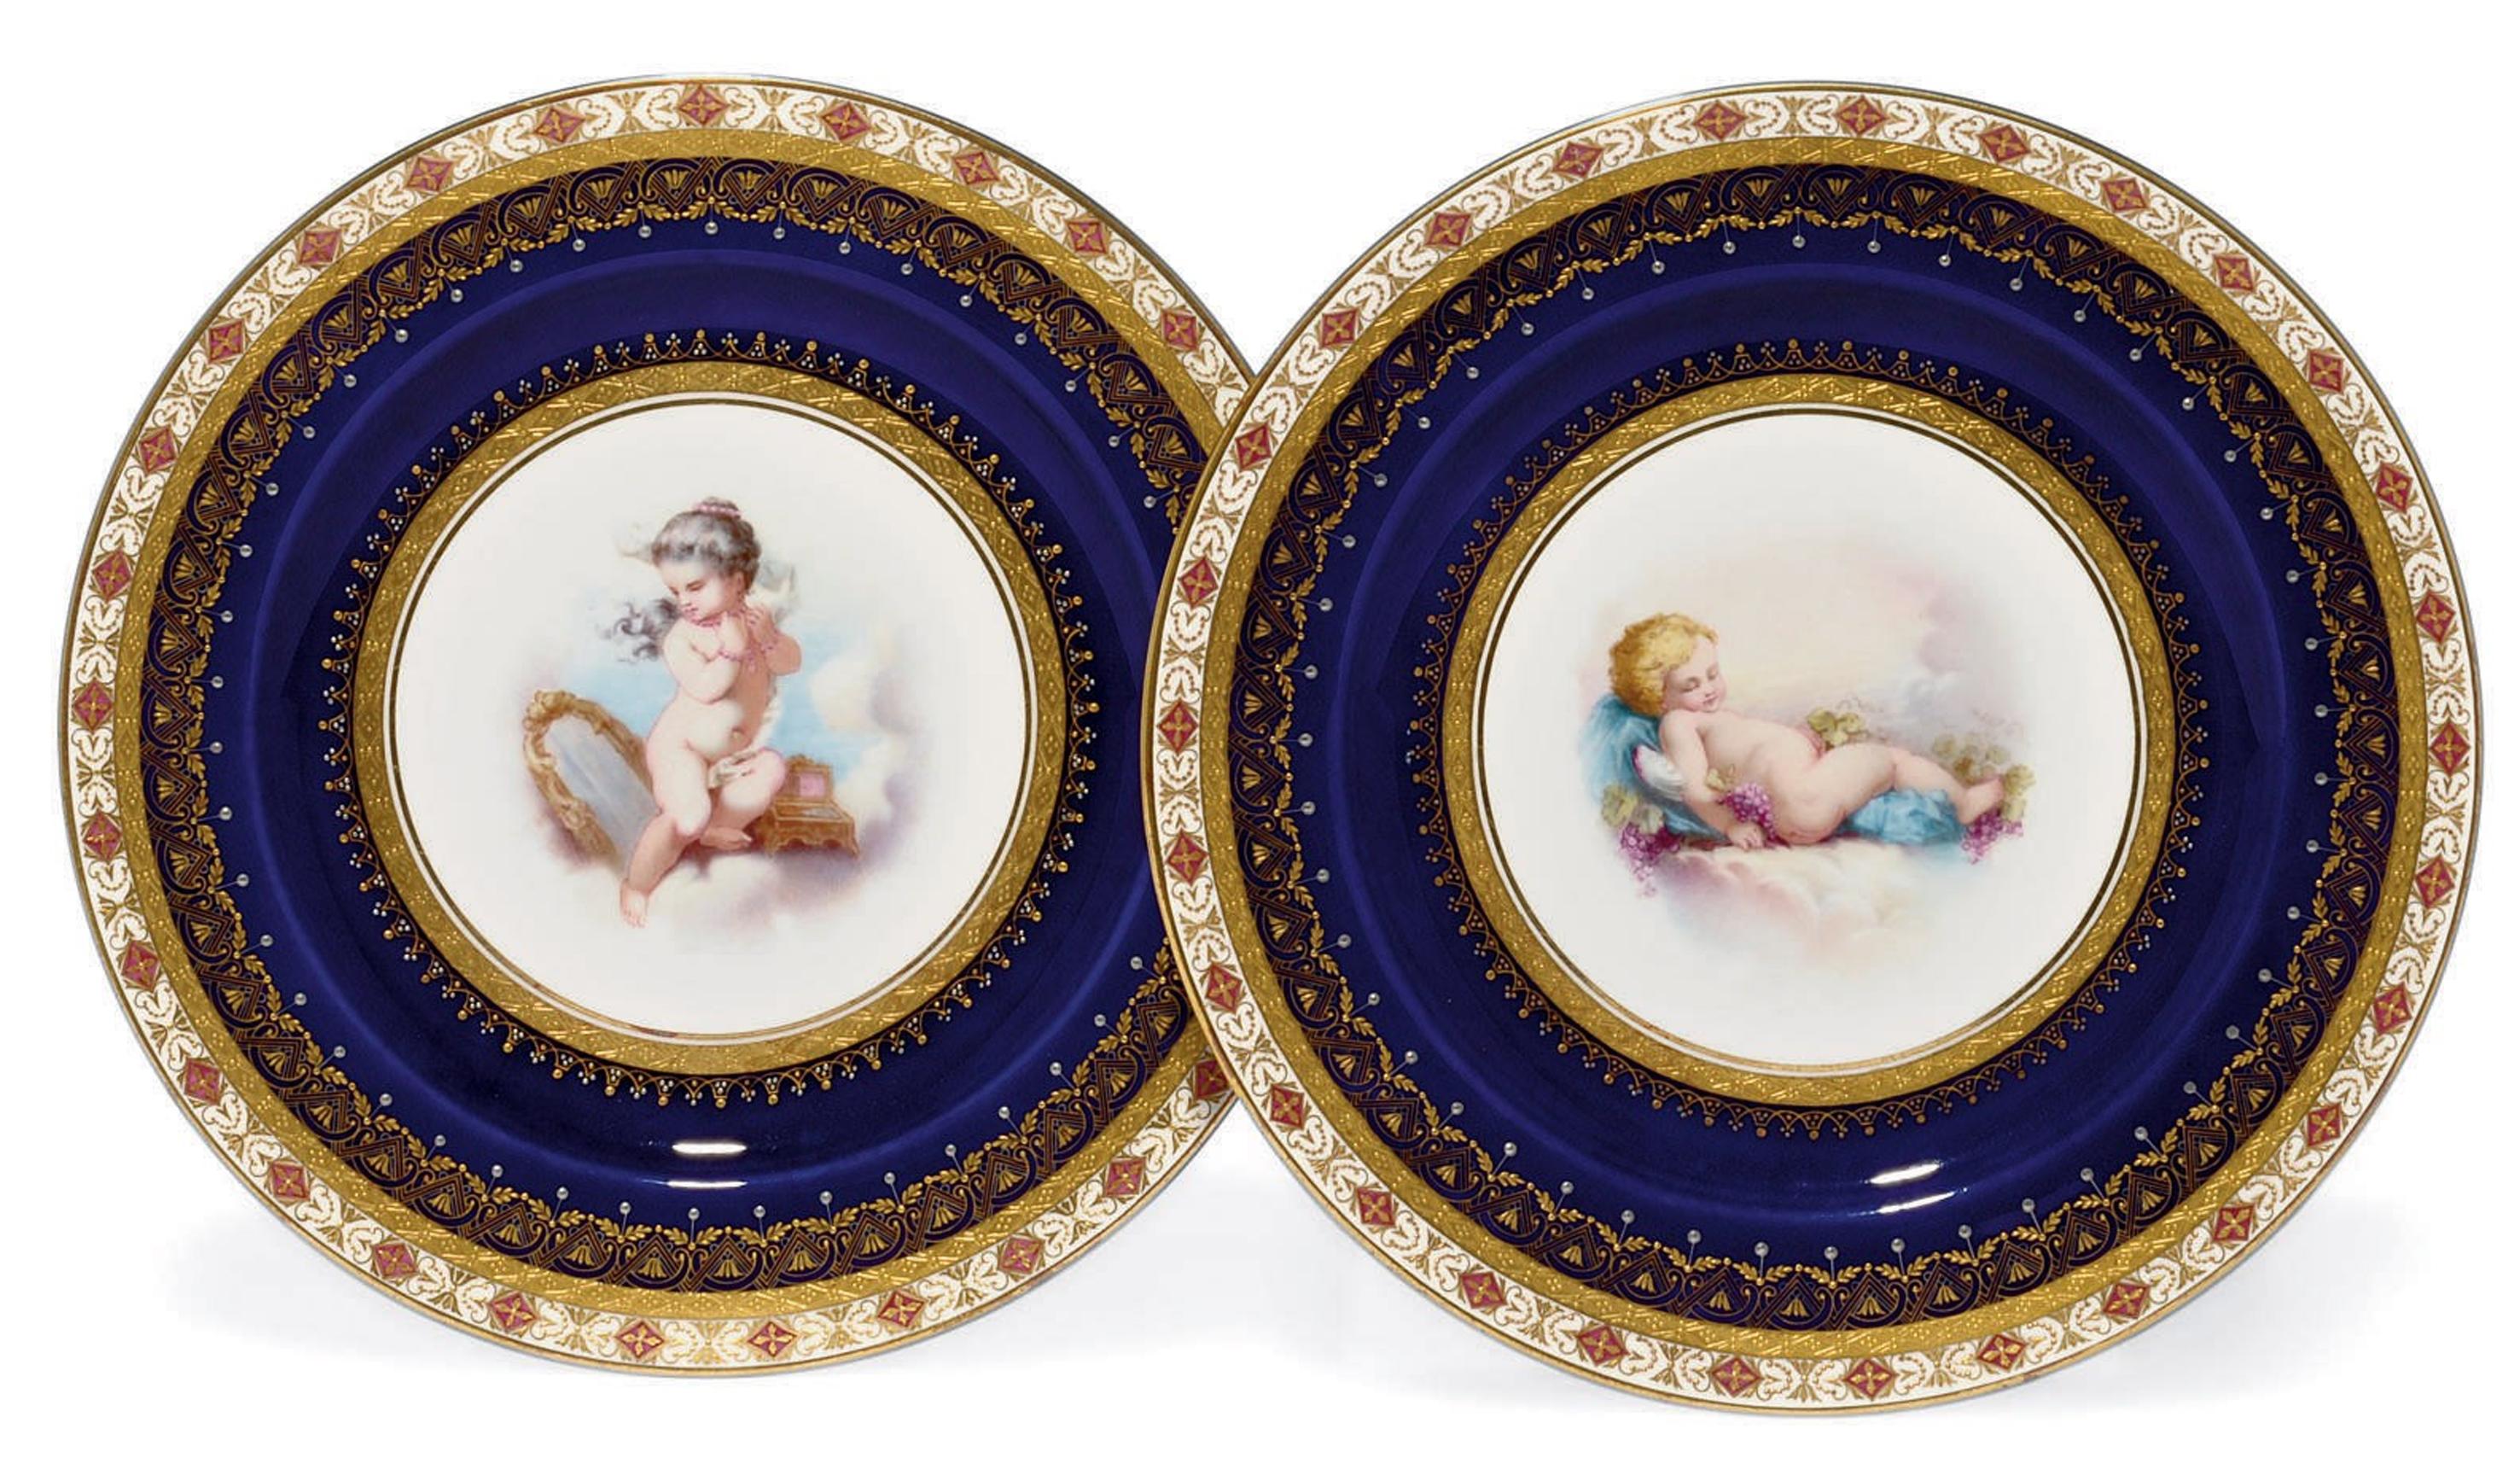 A very decorative pair of porcelain plates depicting Putto at Play, by Minton. 

English, dated 1881. 

Impressed Marks for Minton and year Cypher for 1881.

Each plate is finely painted in the manner of Thomas Kirkby, with putto figures to